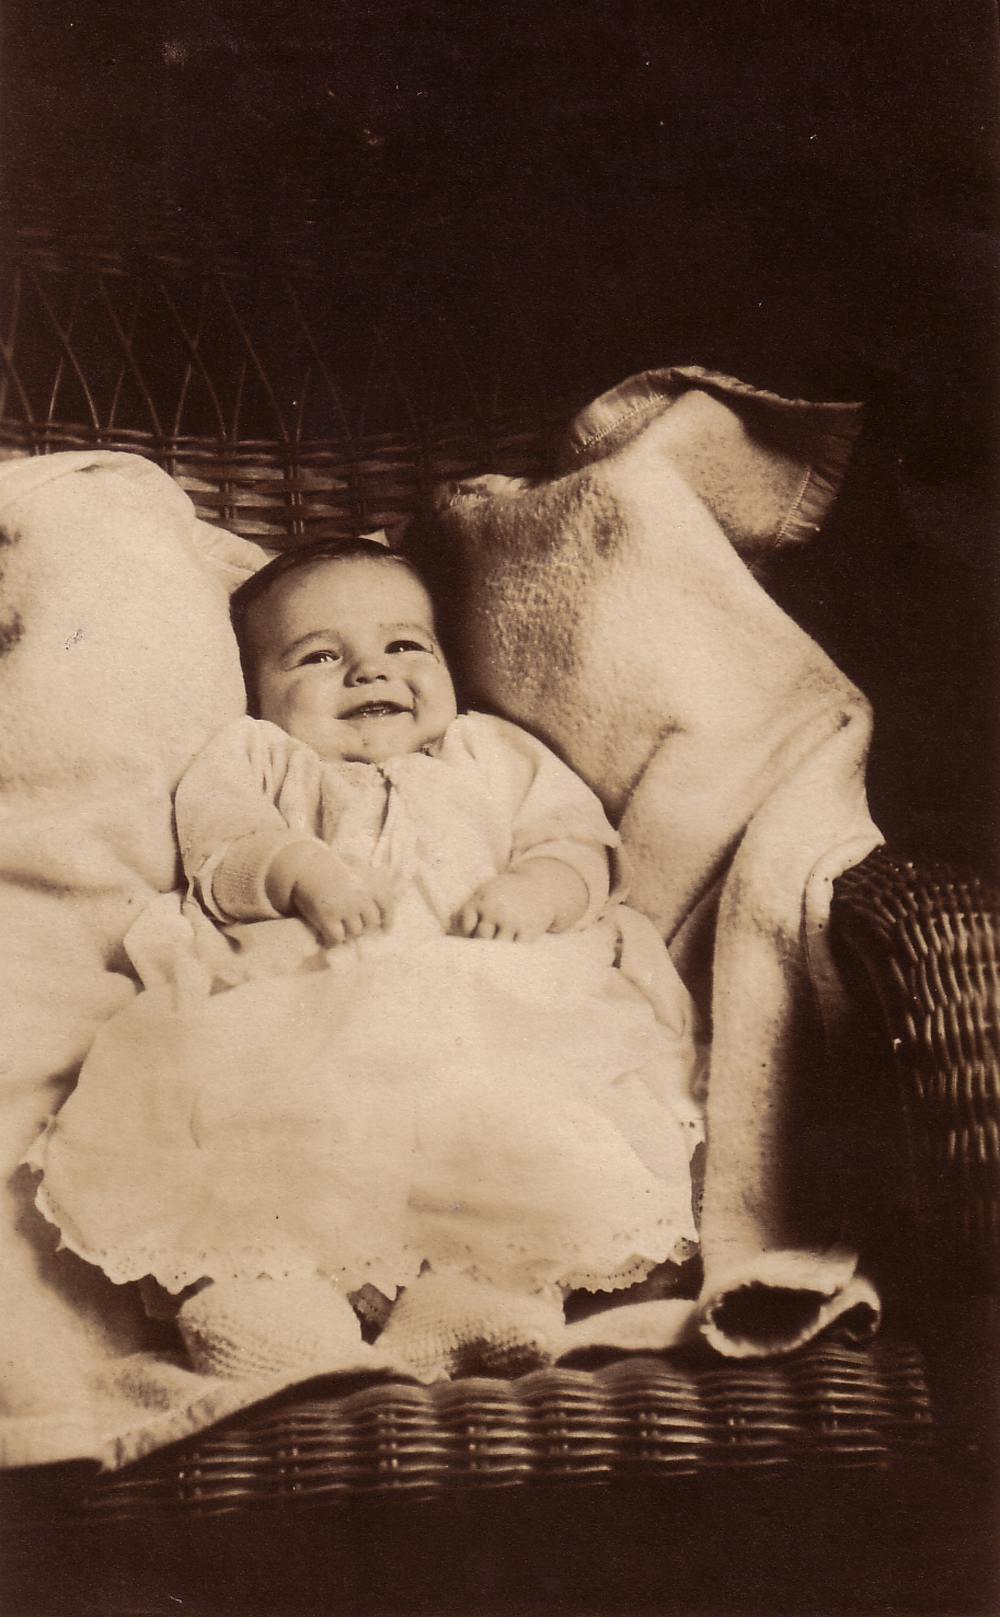 Stanley as a baby, laying in a wicker chair with blankets